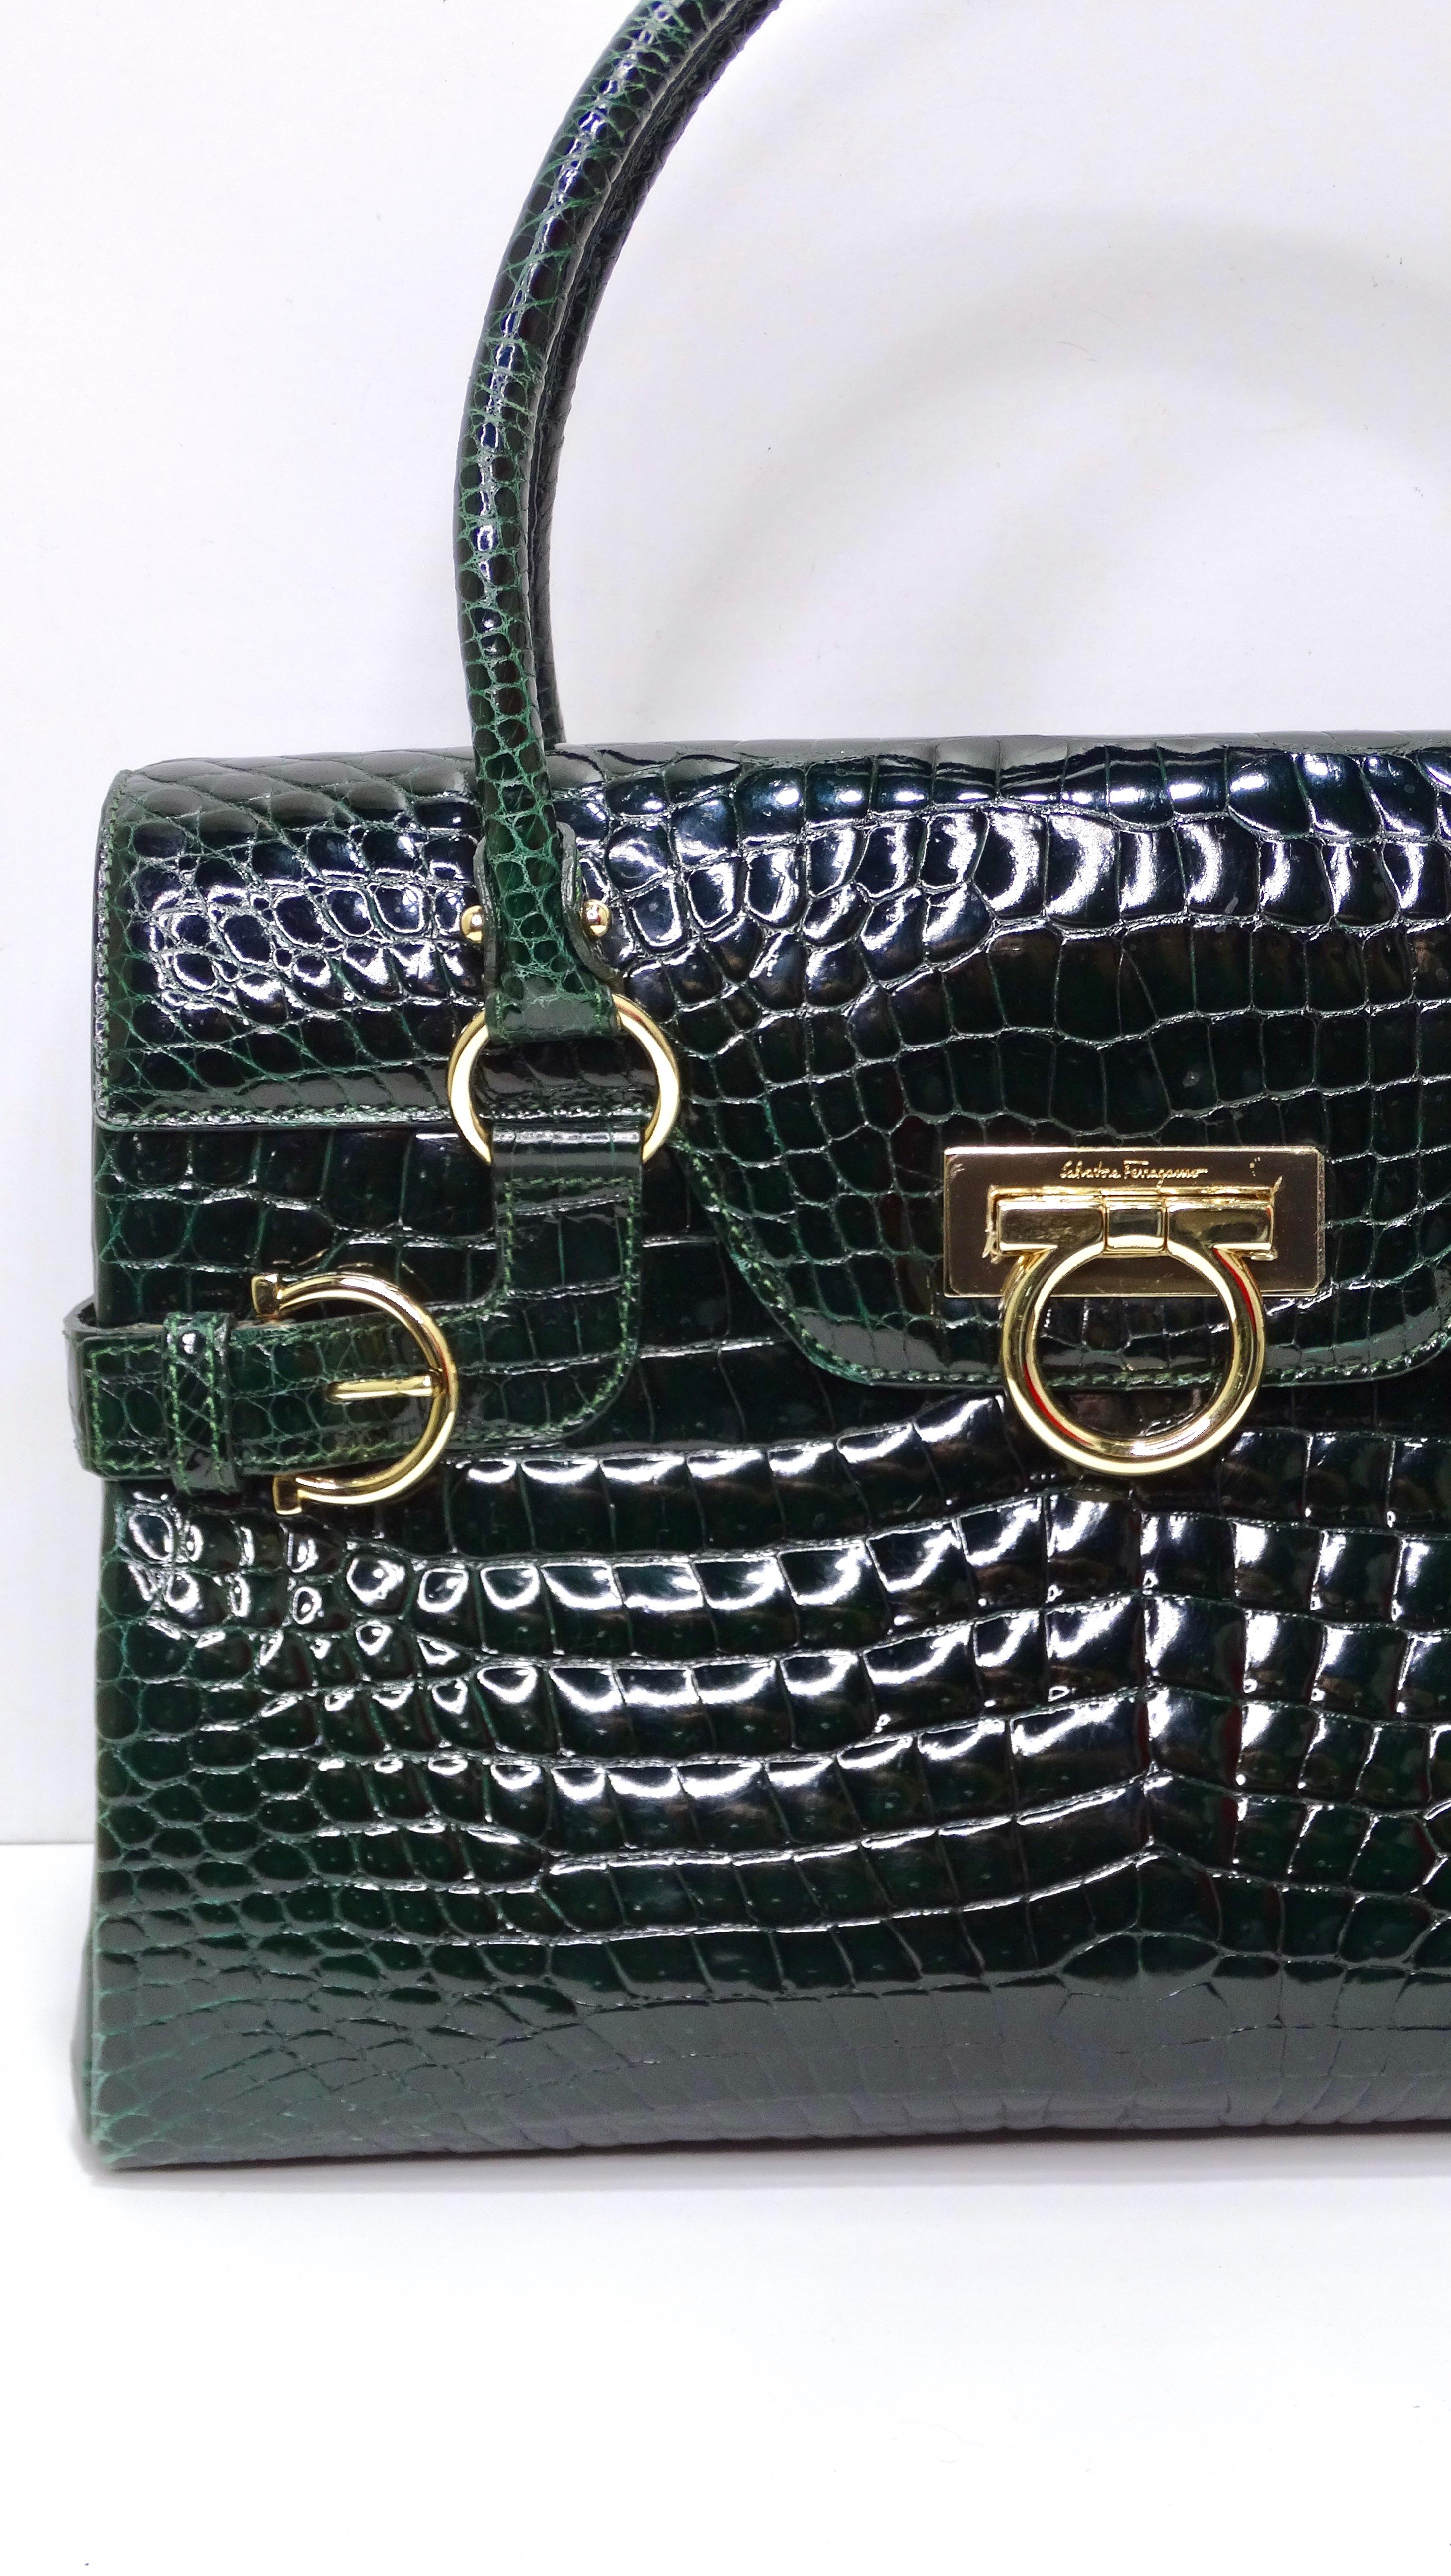 The vintage find of the century! Do not pass this up! This is a beautiful and authentic Salvatore Ferragamo flap top-handle bag in real green alligator in a medium size. This embodies a ladylike sophistication perfect for the chic fashionista that